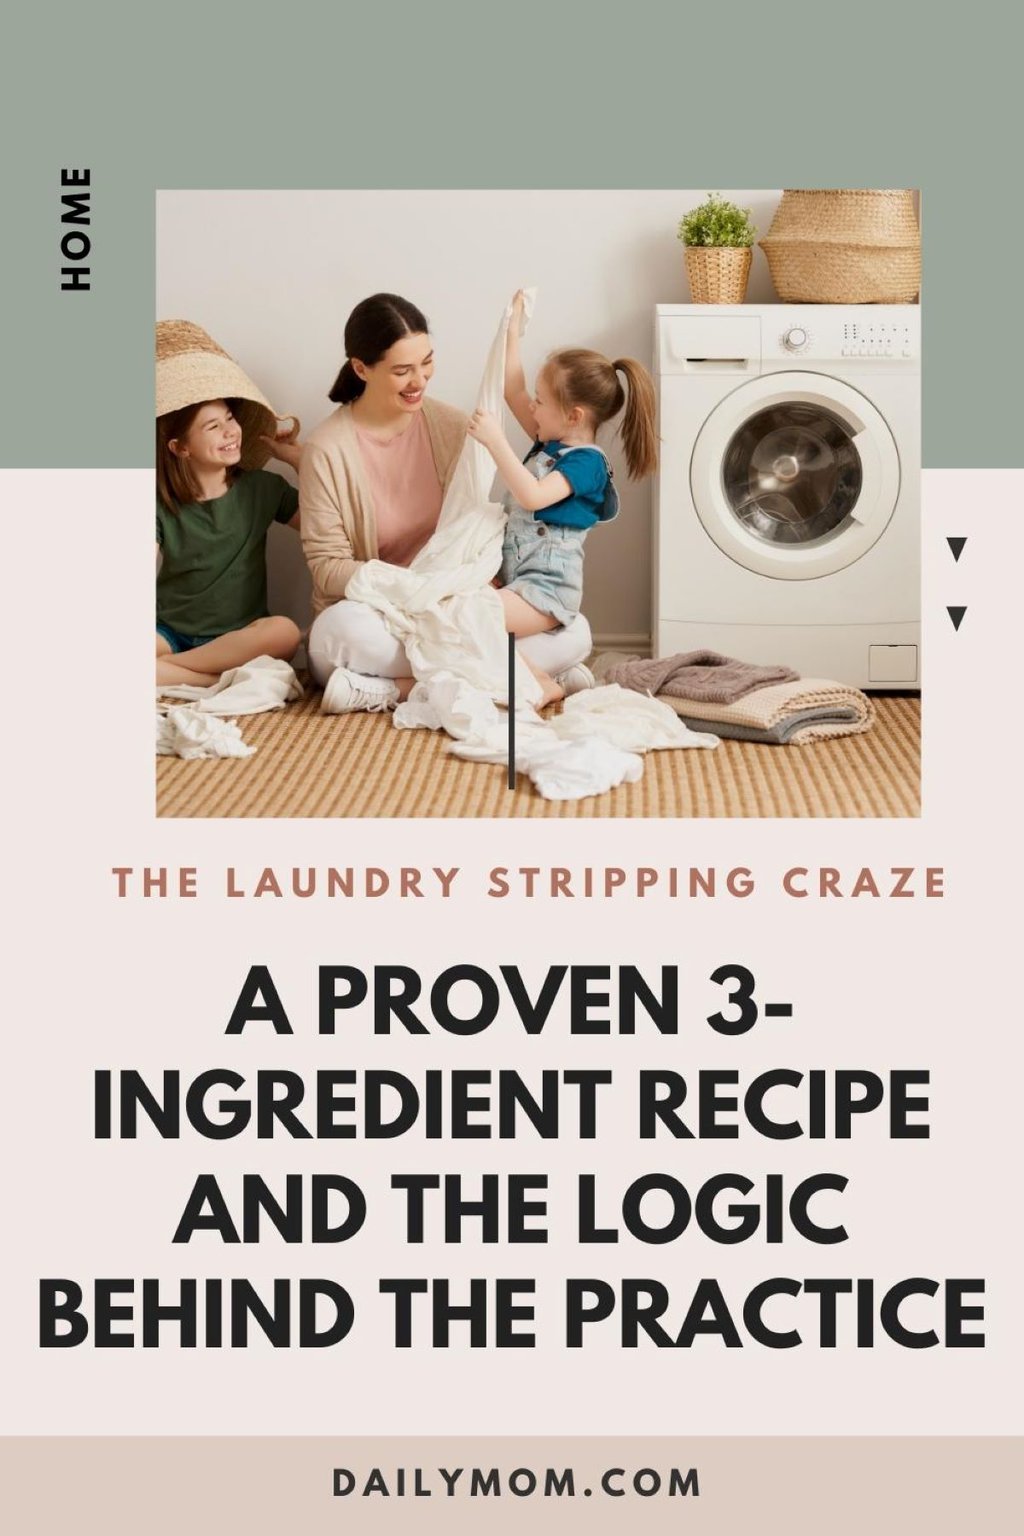 The Laundry Stripping Craze: A Proven 3-Ingredient Recipe And The Logic Behind The Practice